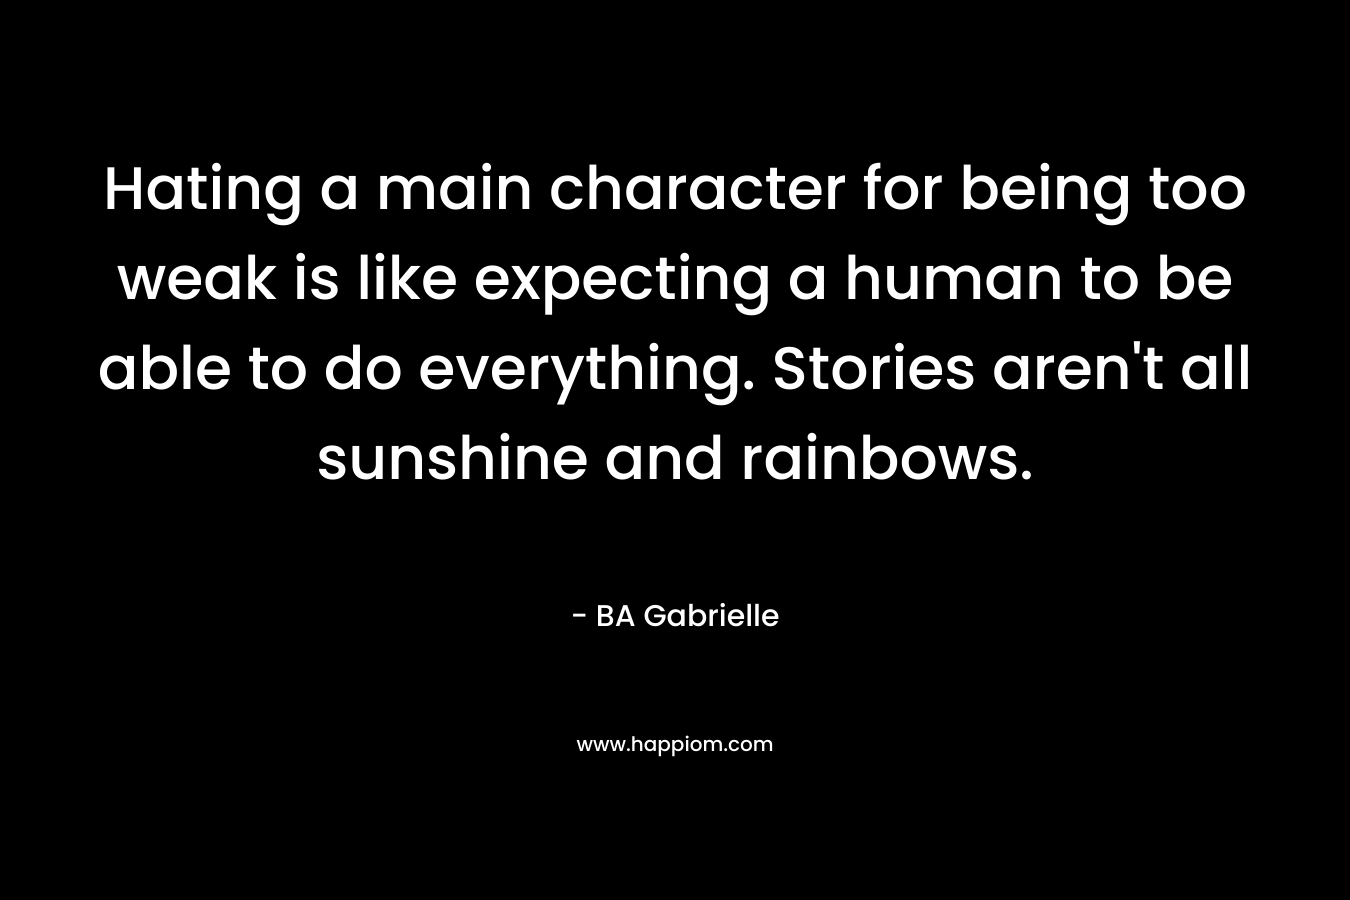 Hating a main character for being too weak is like expecting a human to be able to do everything. Stories aren’t all sunshine and rainbows. – BA Gabrielle